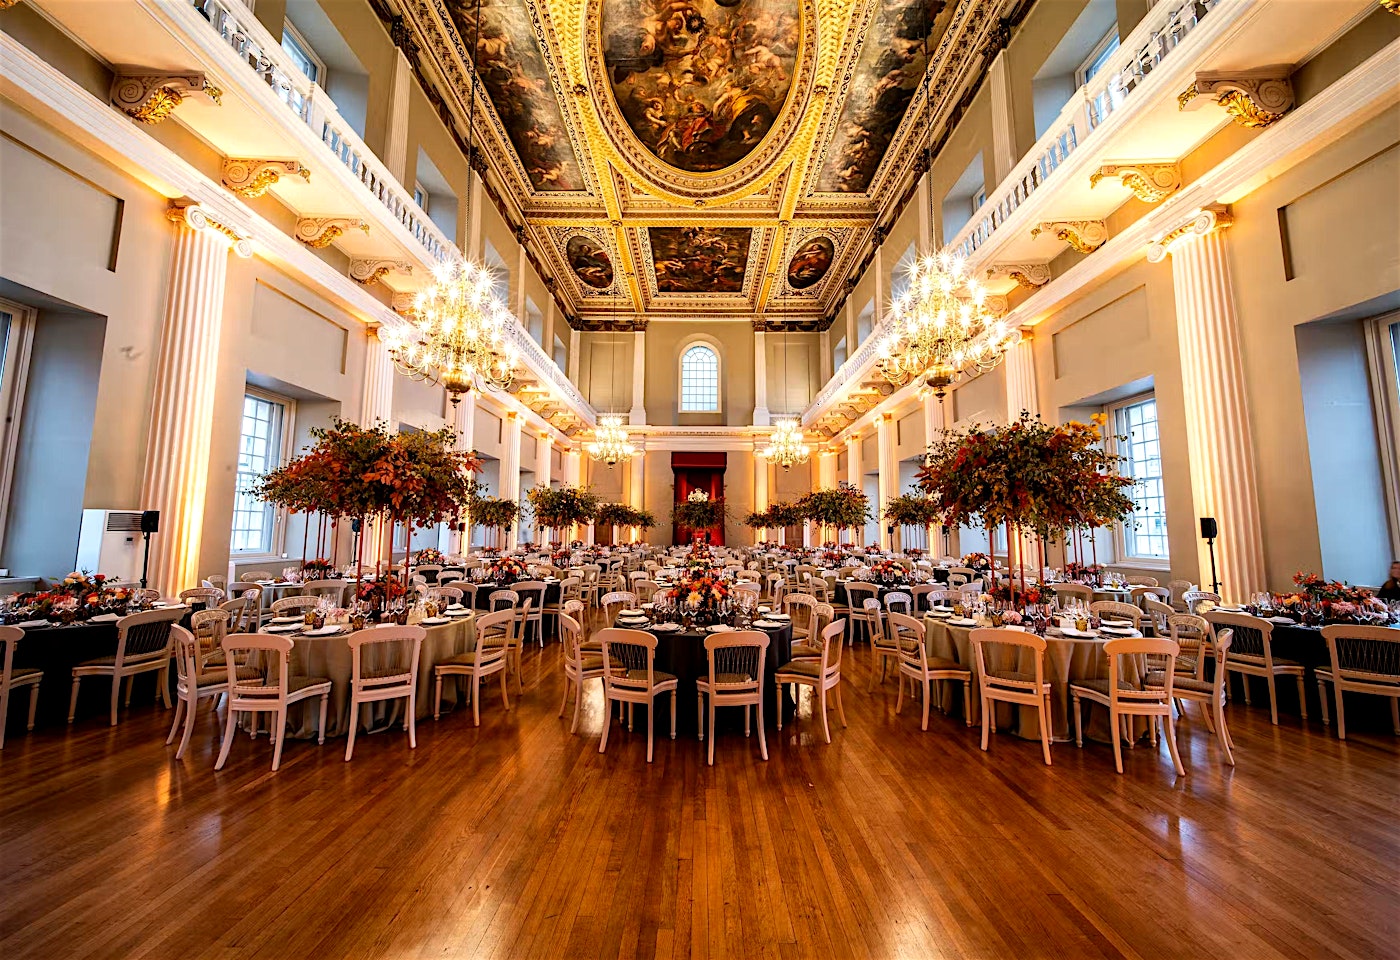 Banqueting House, Christmas venue in London, 2